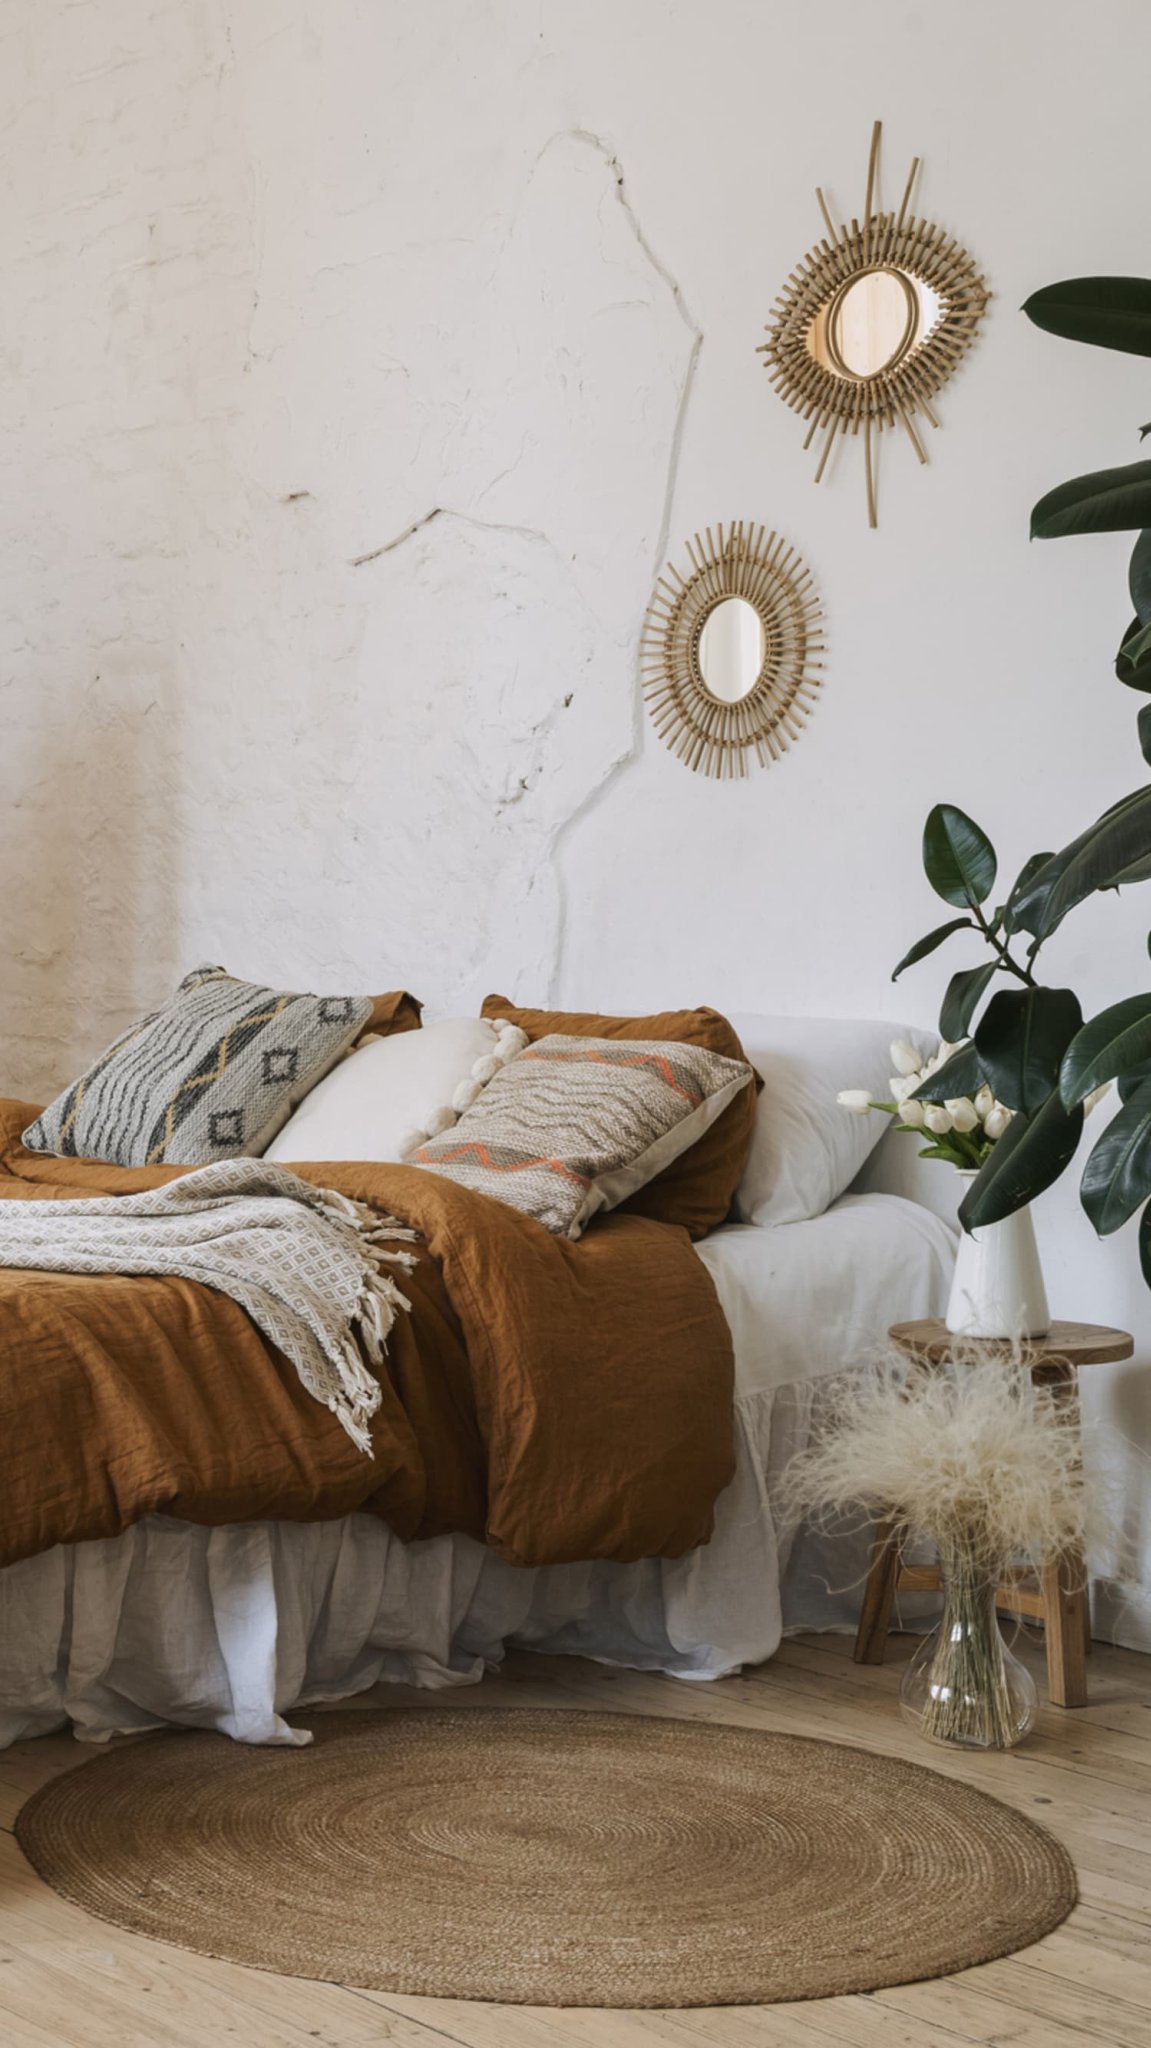 The Anatomy of the Perfect Bedroom, According to Sleep Experts